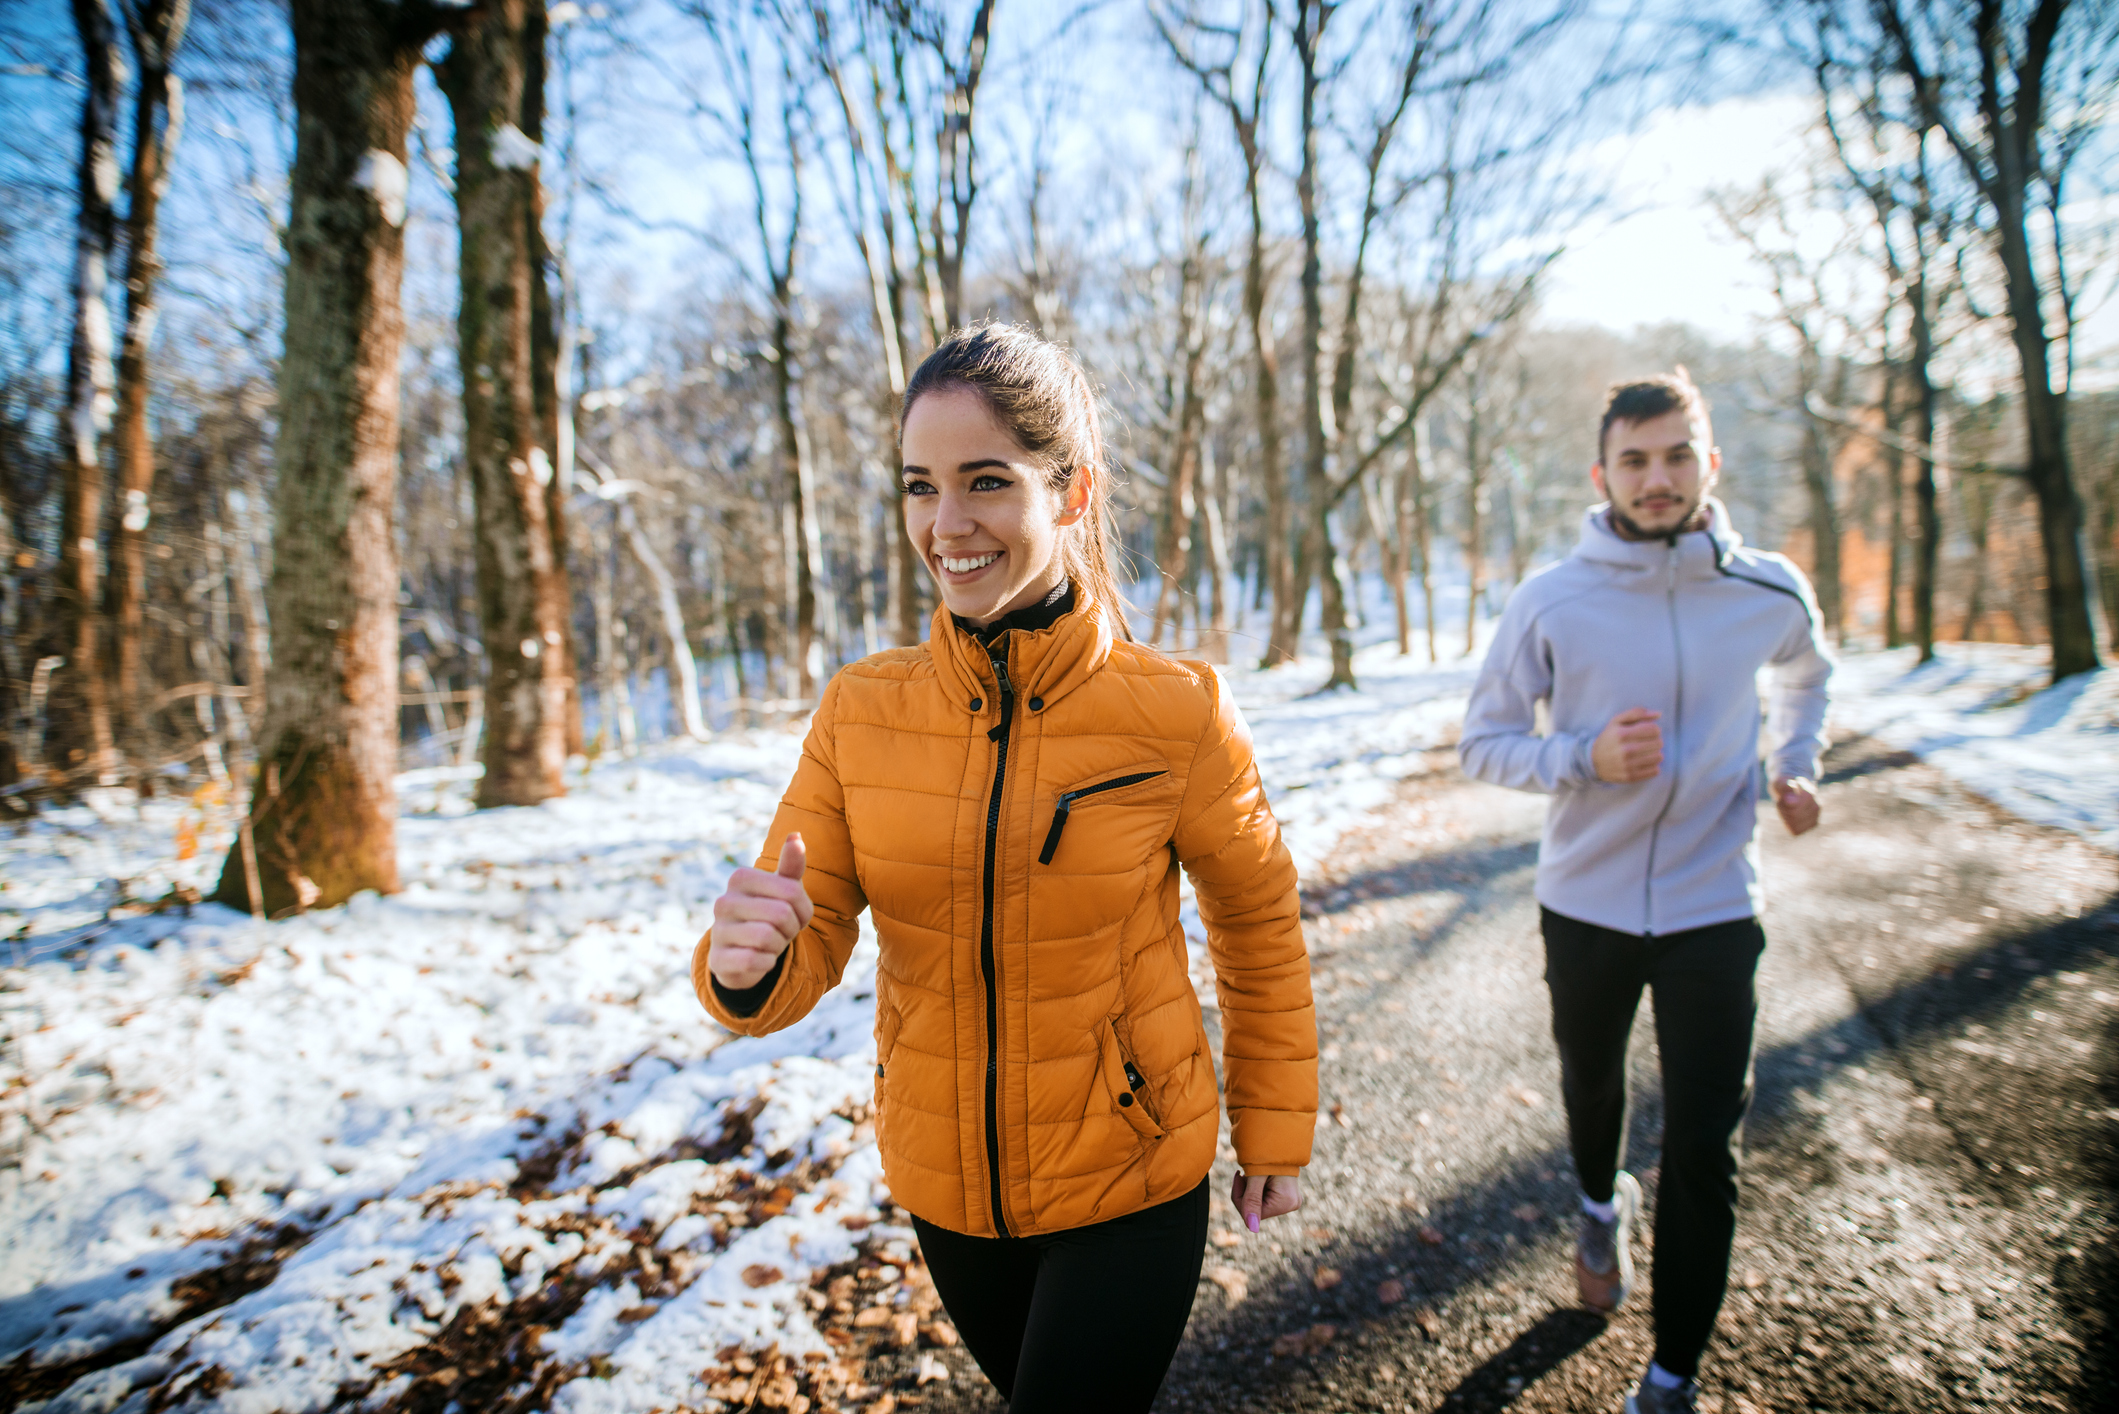 Winter Workouts for Heart Health